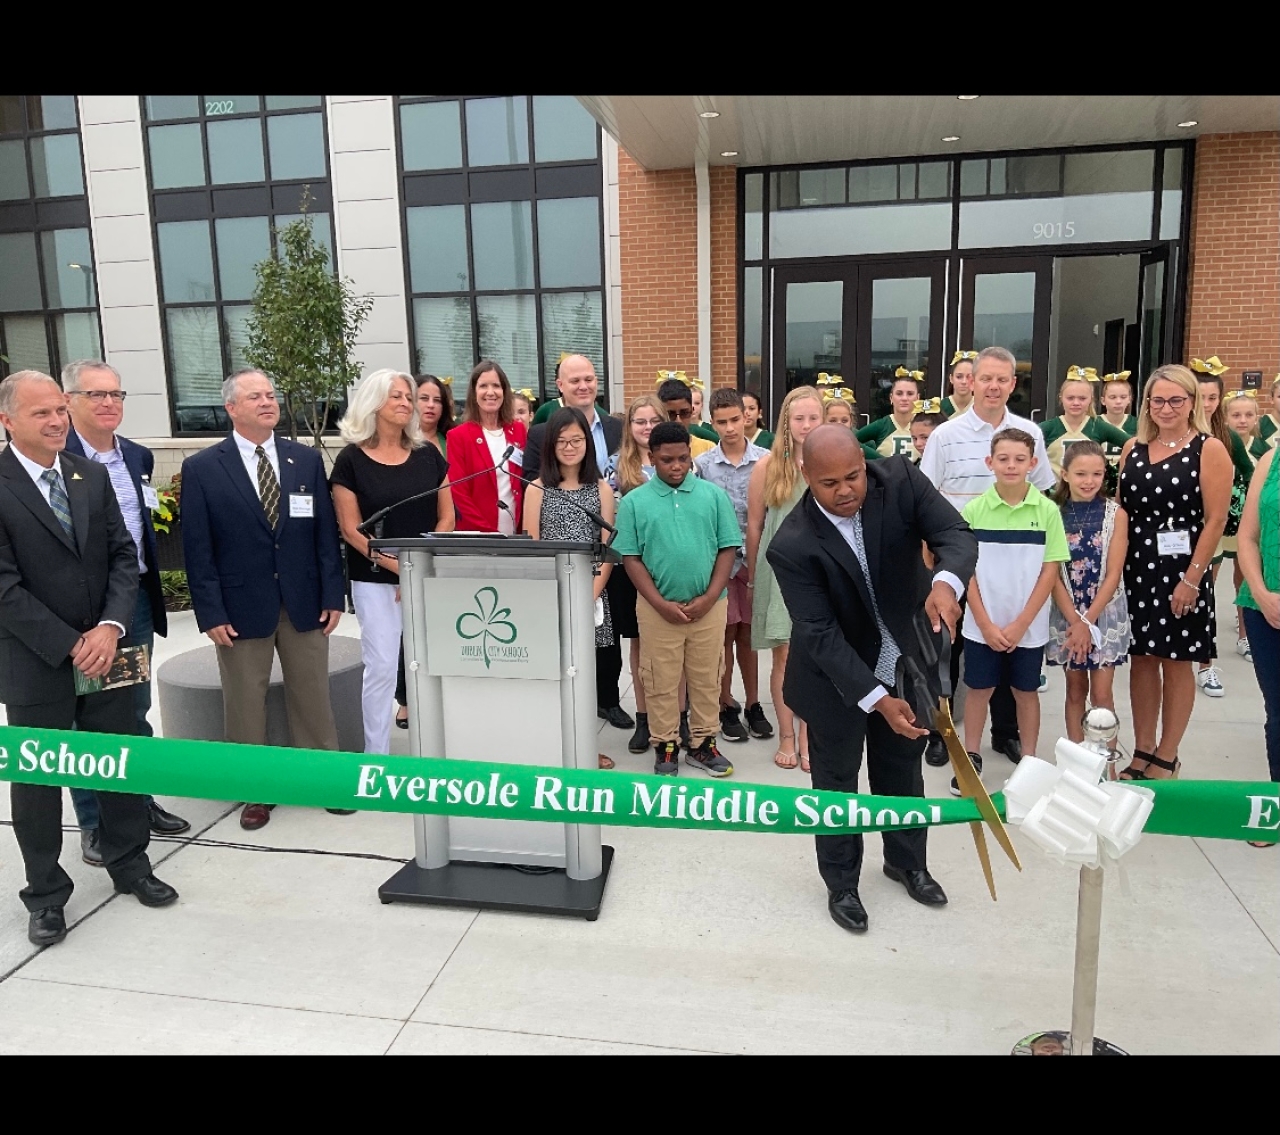 Rep. Richardson attends the Eversole Run Middle School Ribbon Cutting Ceremony